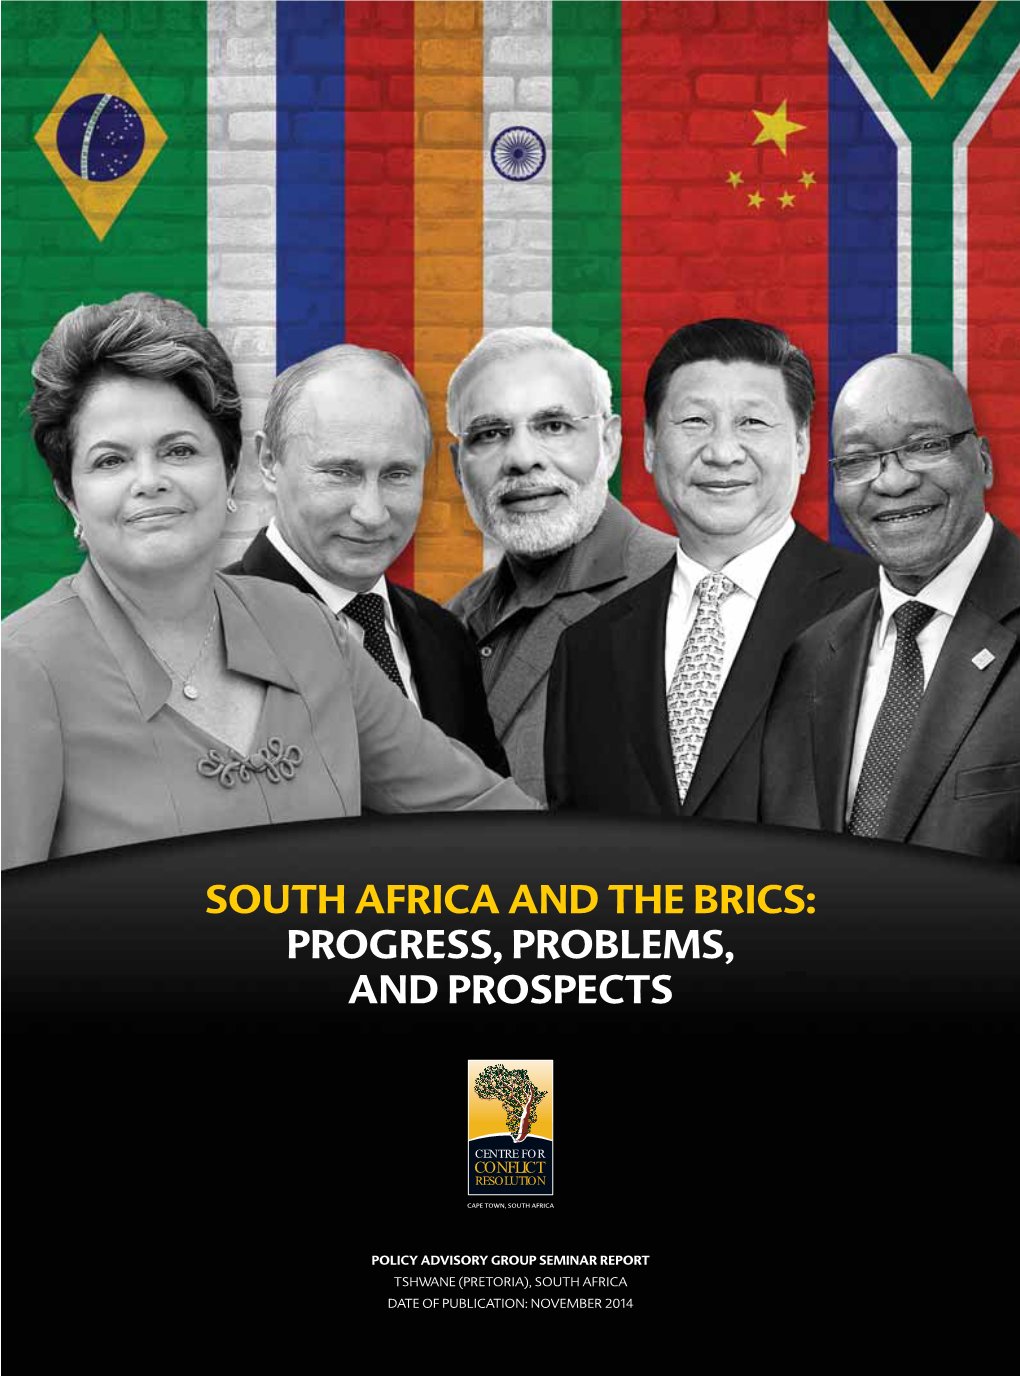 South Africa and the Brics: Progress, Problems, and Prospects